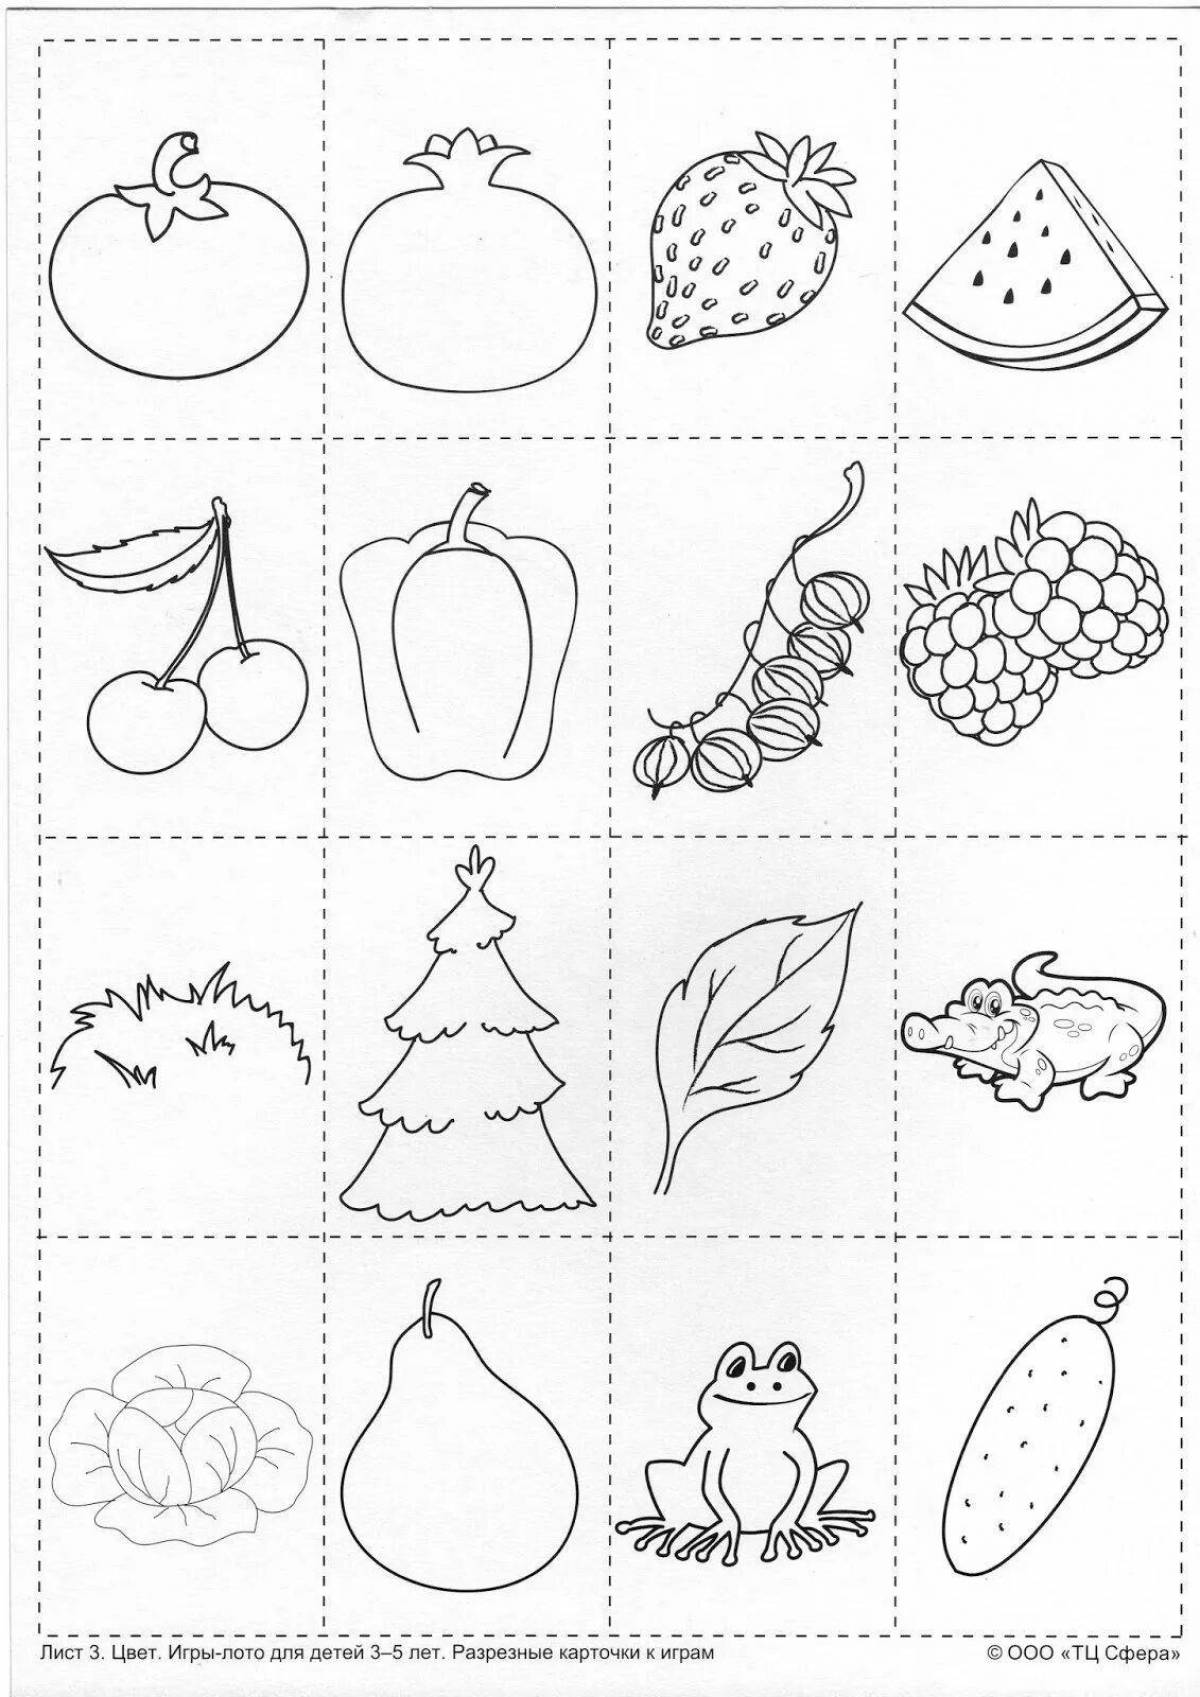 Colorful coloring pages for everyone